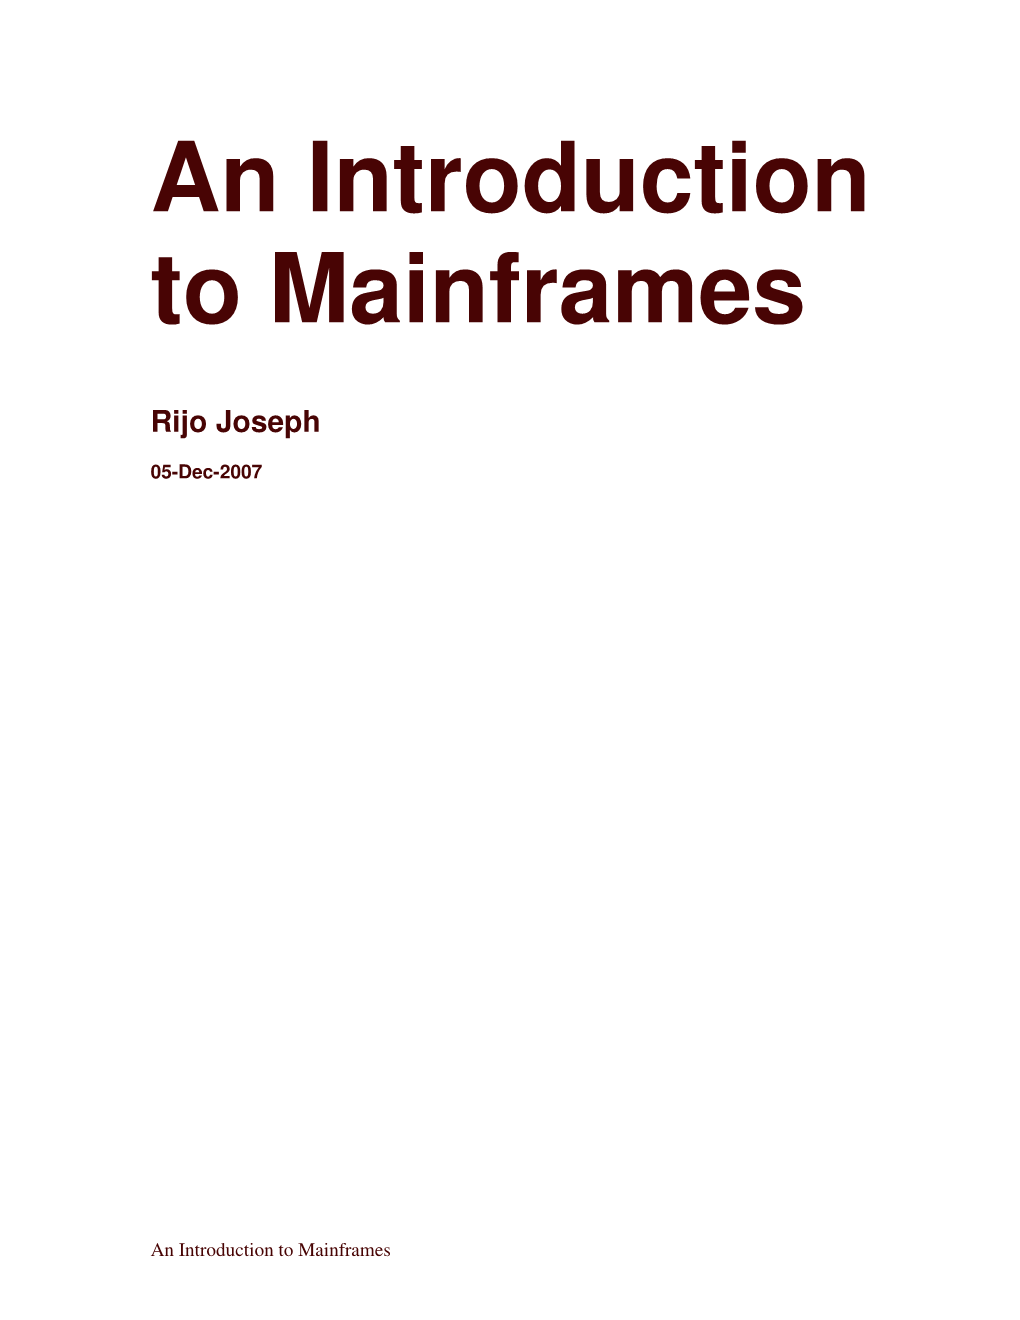 An Introduction to Mainframes.Pdf